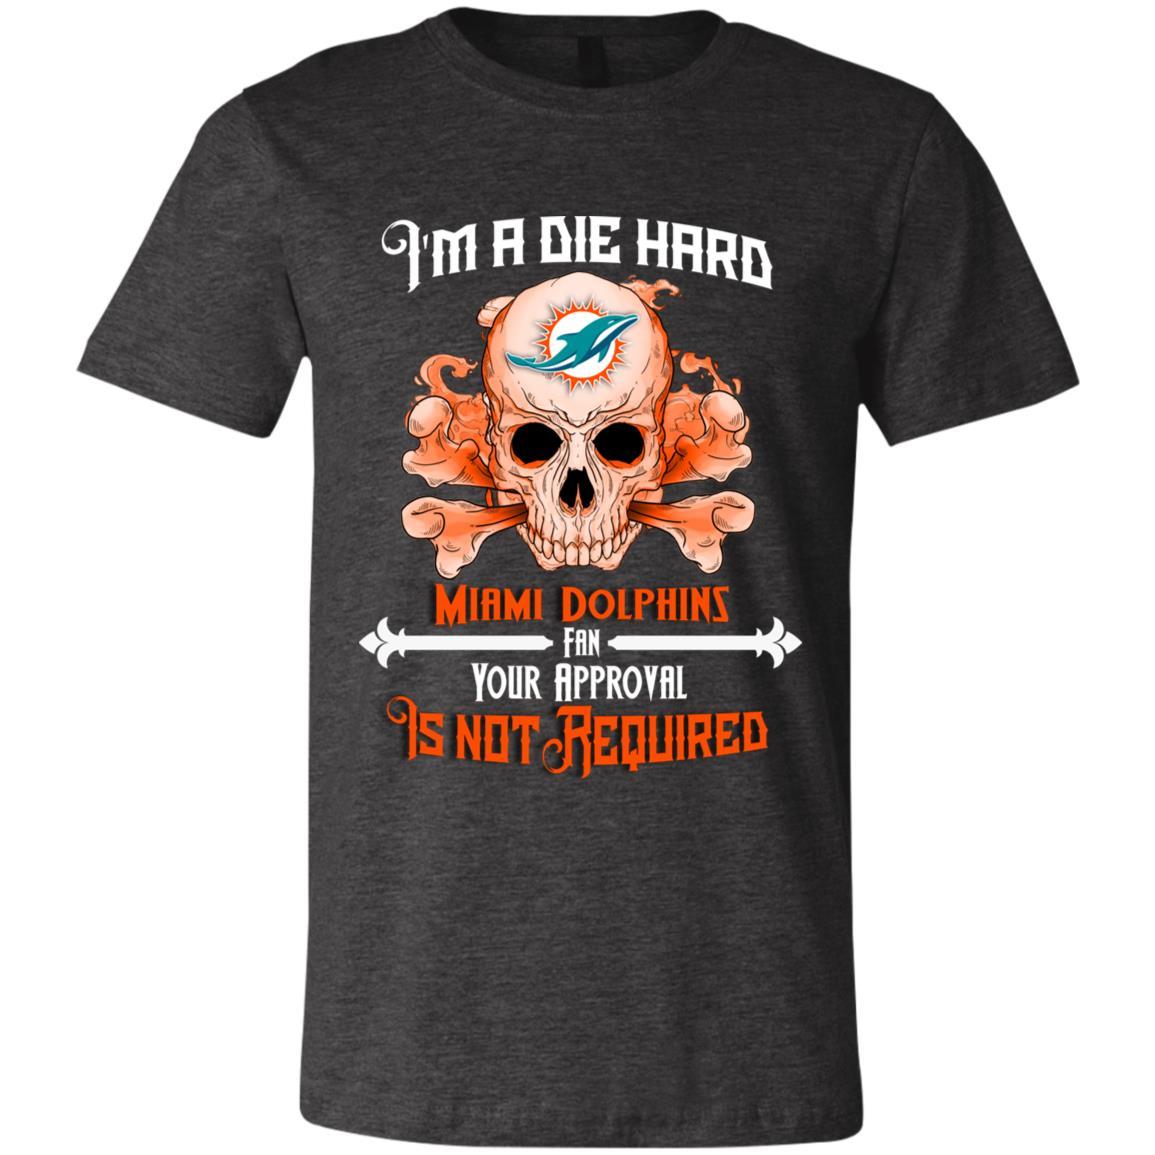 Miami Dolphins Shop - I Am Die Hard Fan Your Approval Is Not Required Miami Dolphins Tshirt 2